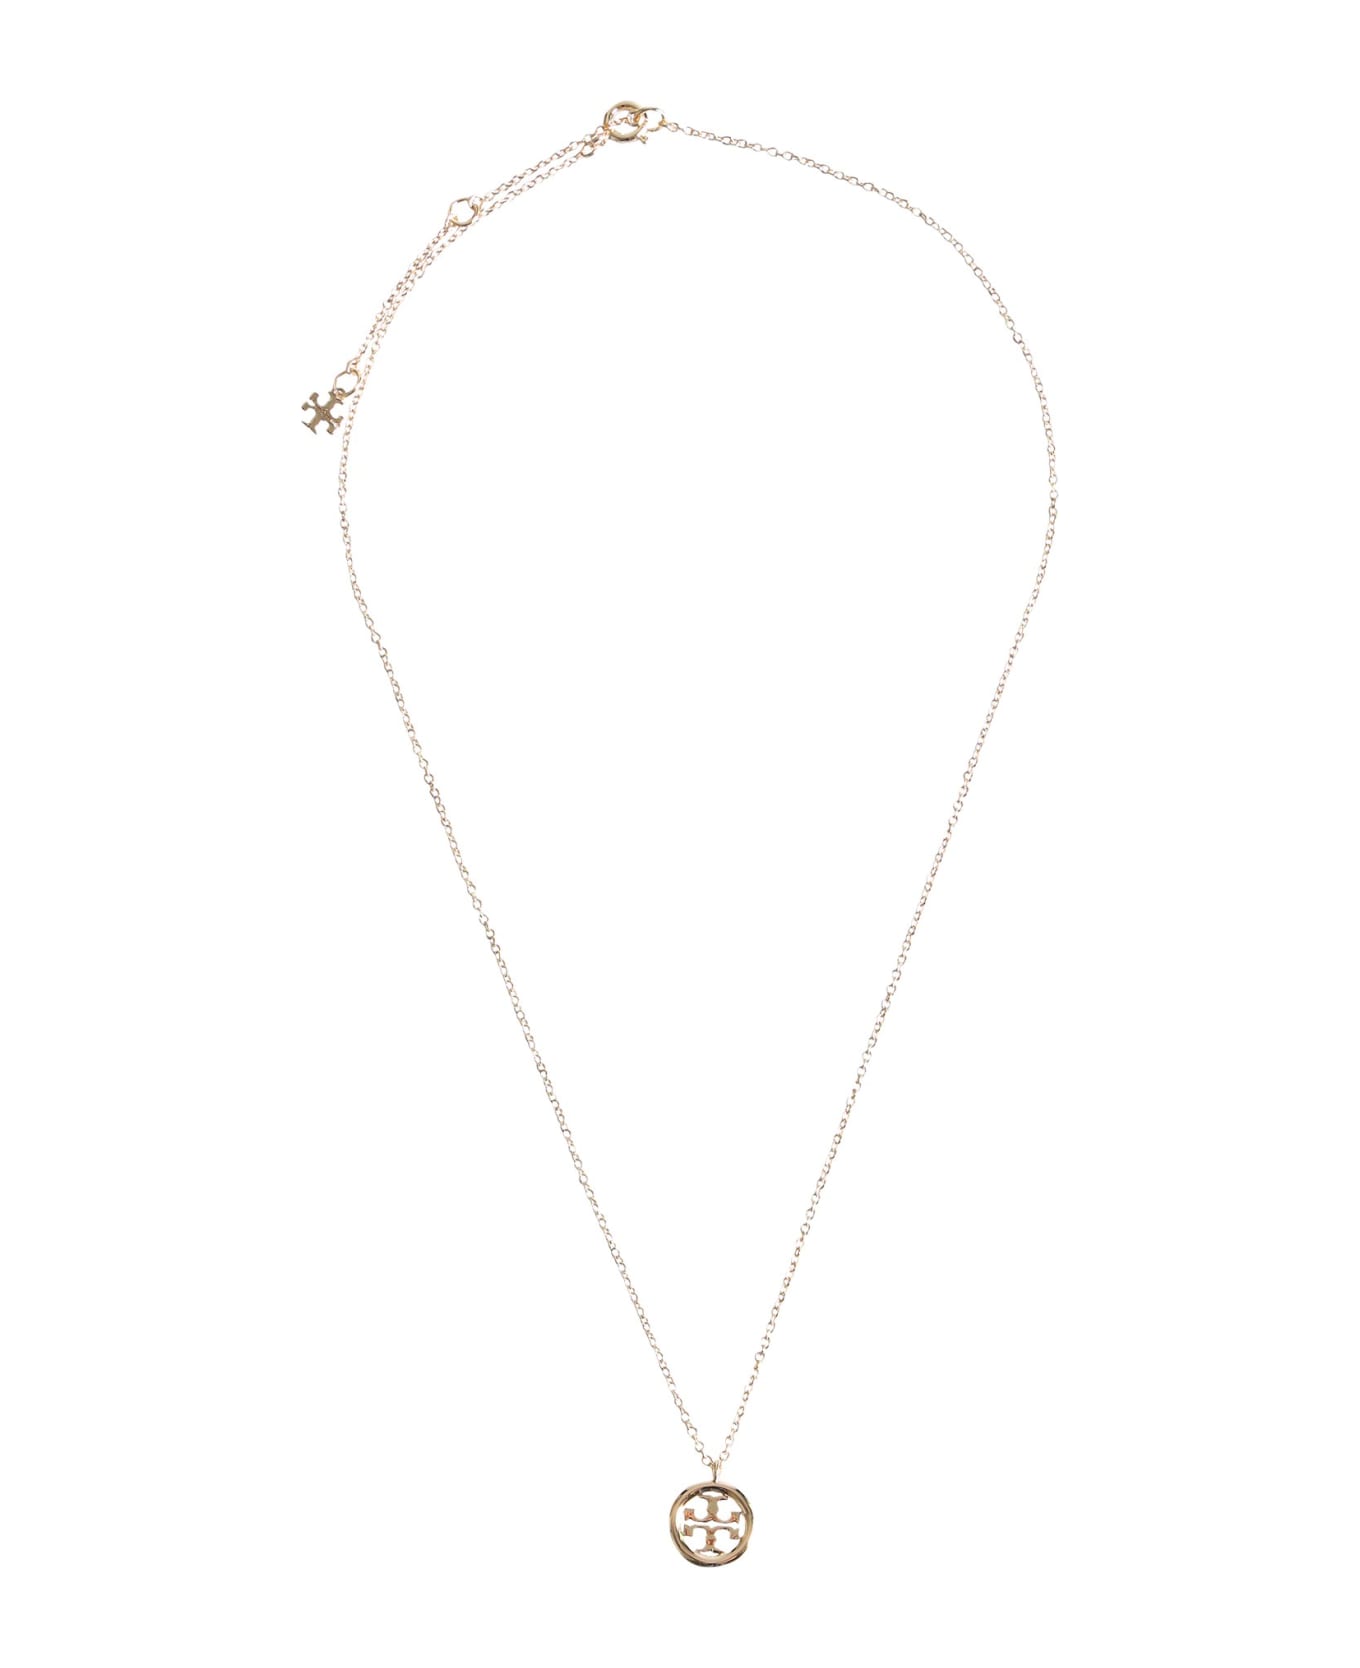 Tory Burch Miller Necklace - ORO